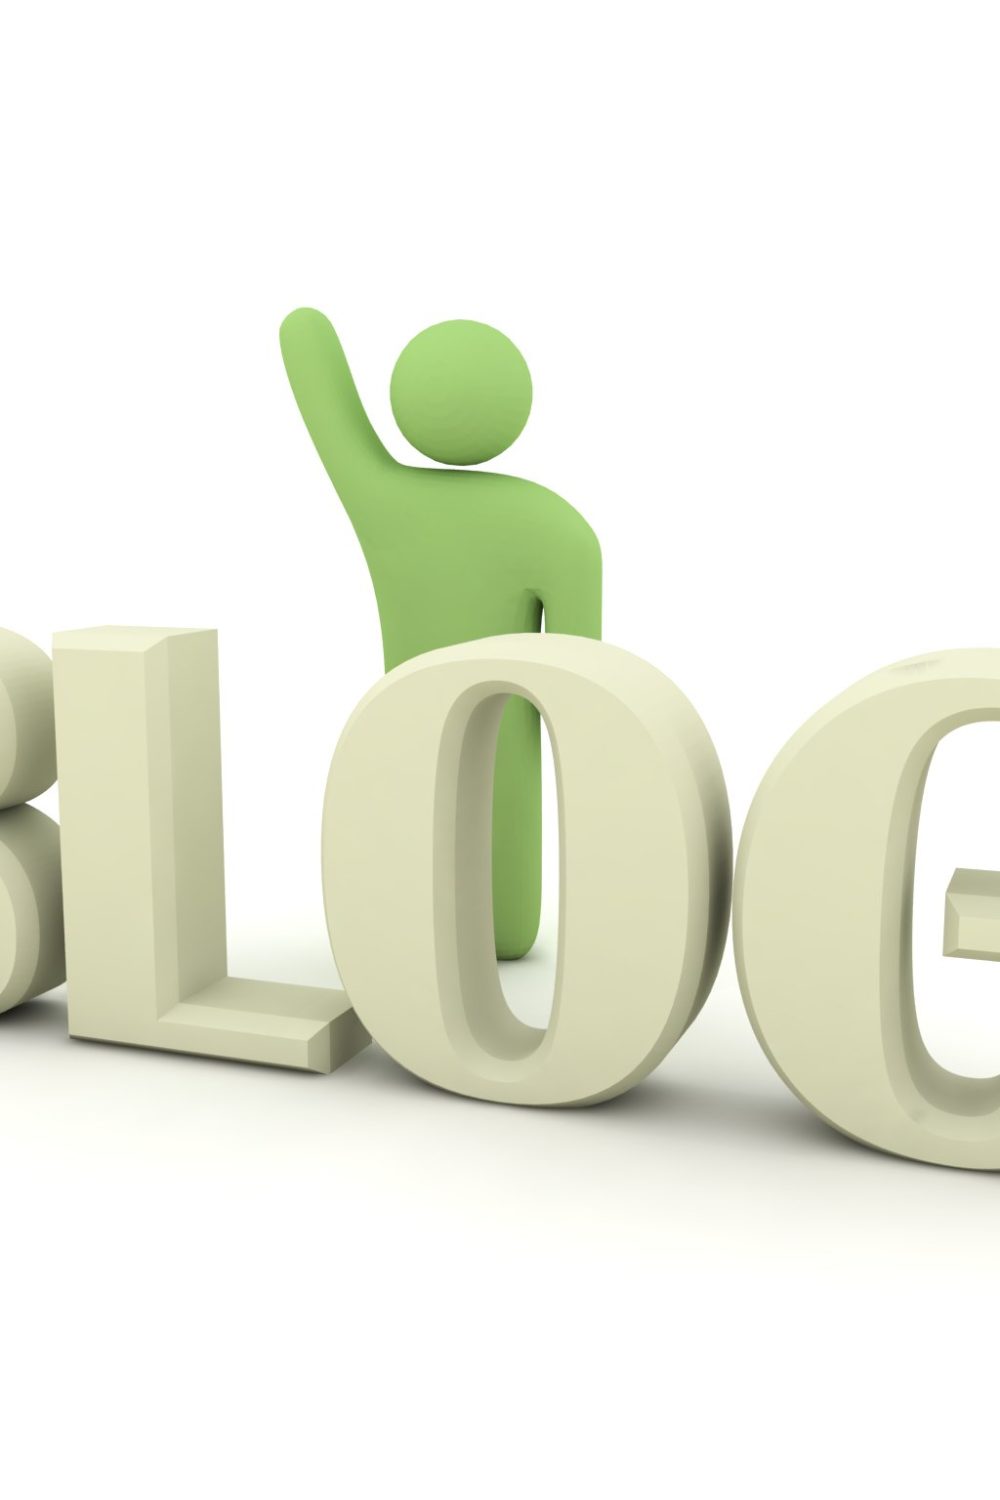 7 Ways to Earn Money from Your Recreational Blog - Rita Reviews Pic 1